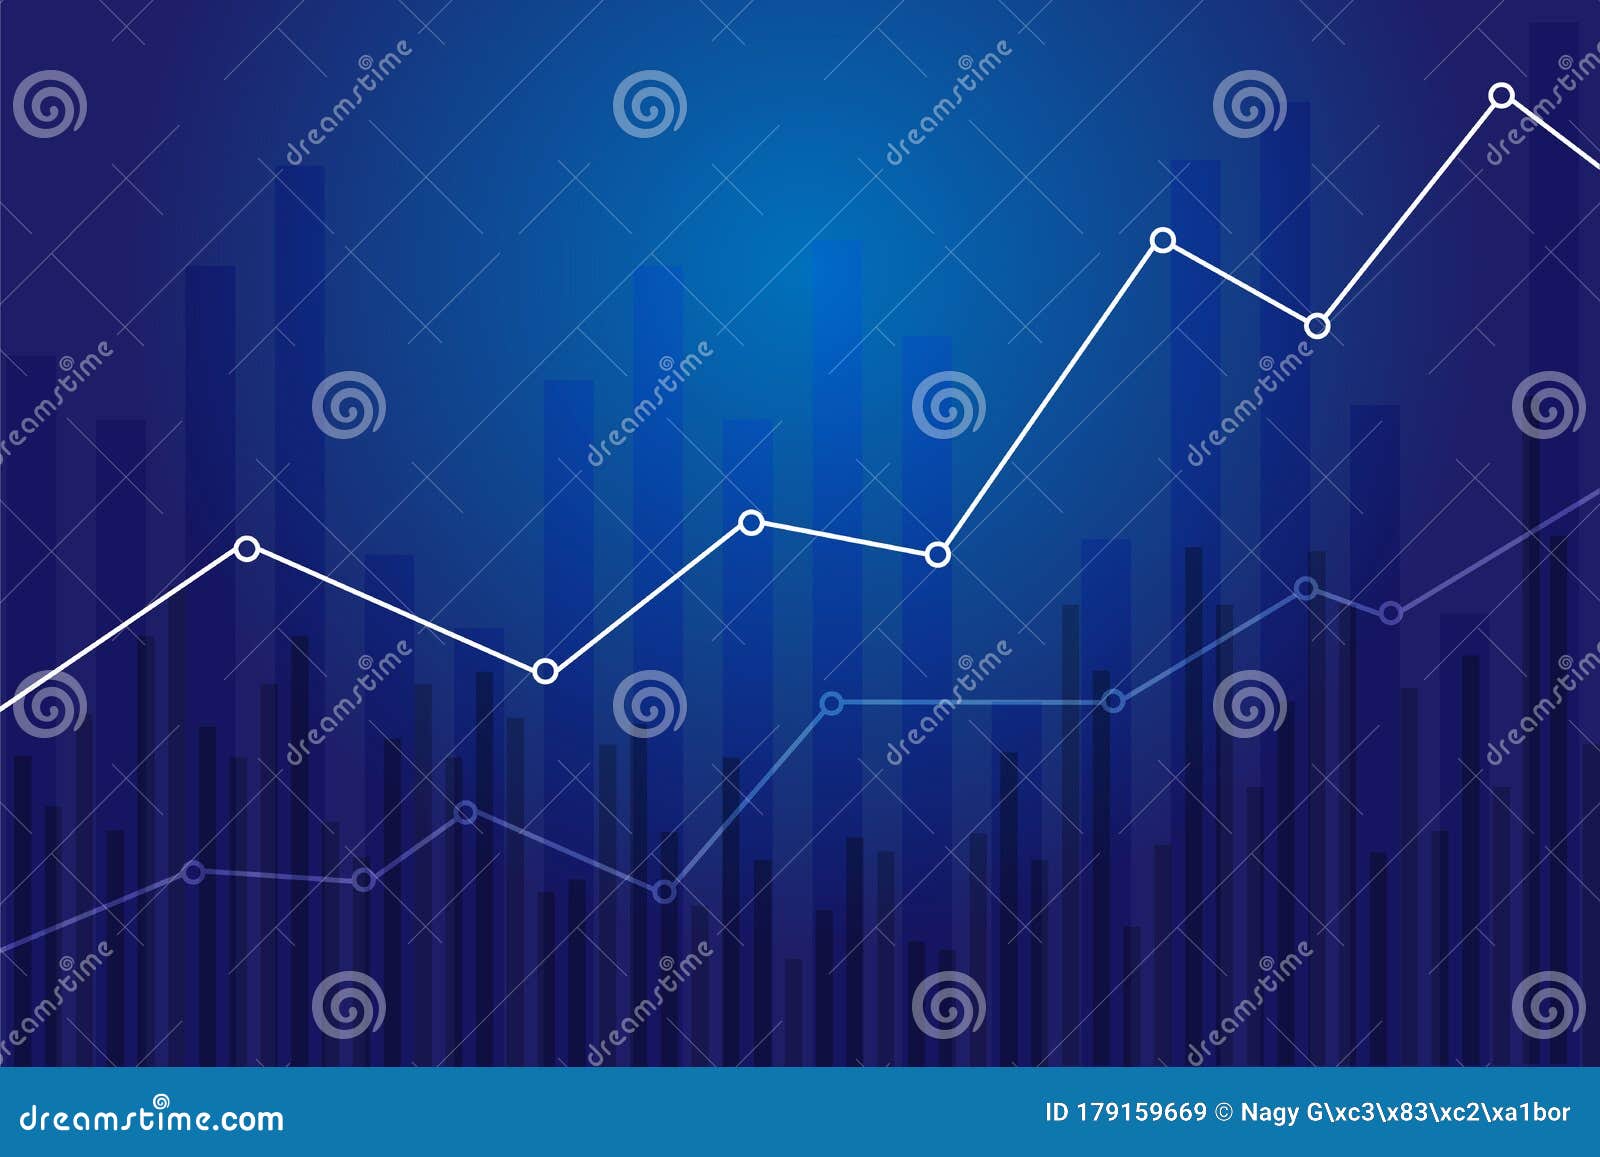 finance uptrend. diagram graphic s. statistic template on blue background